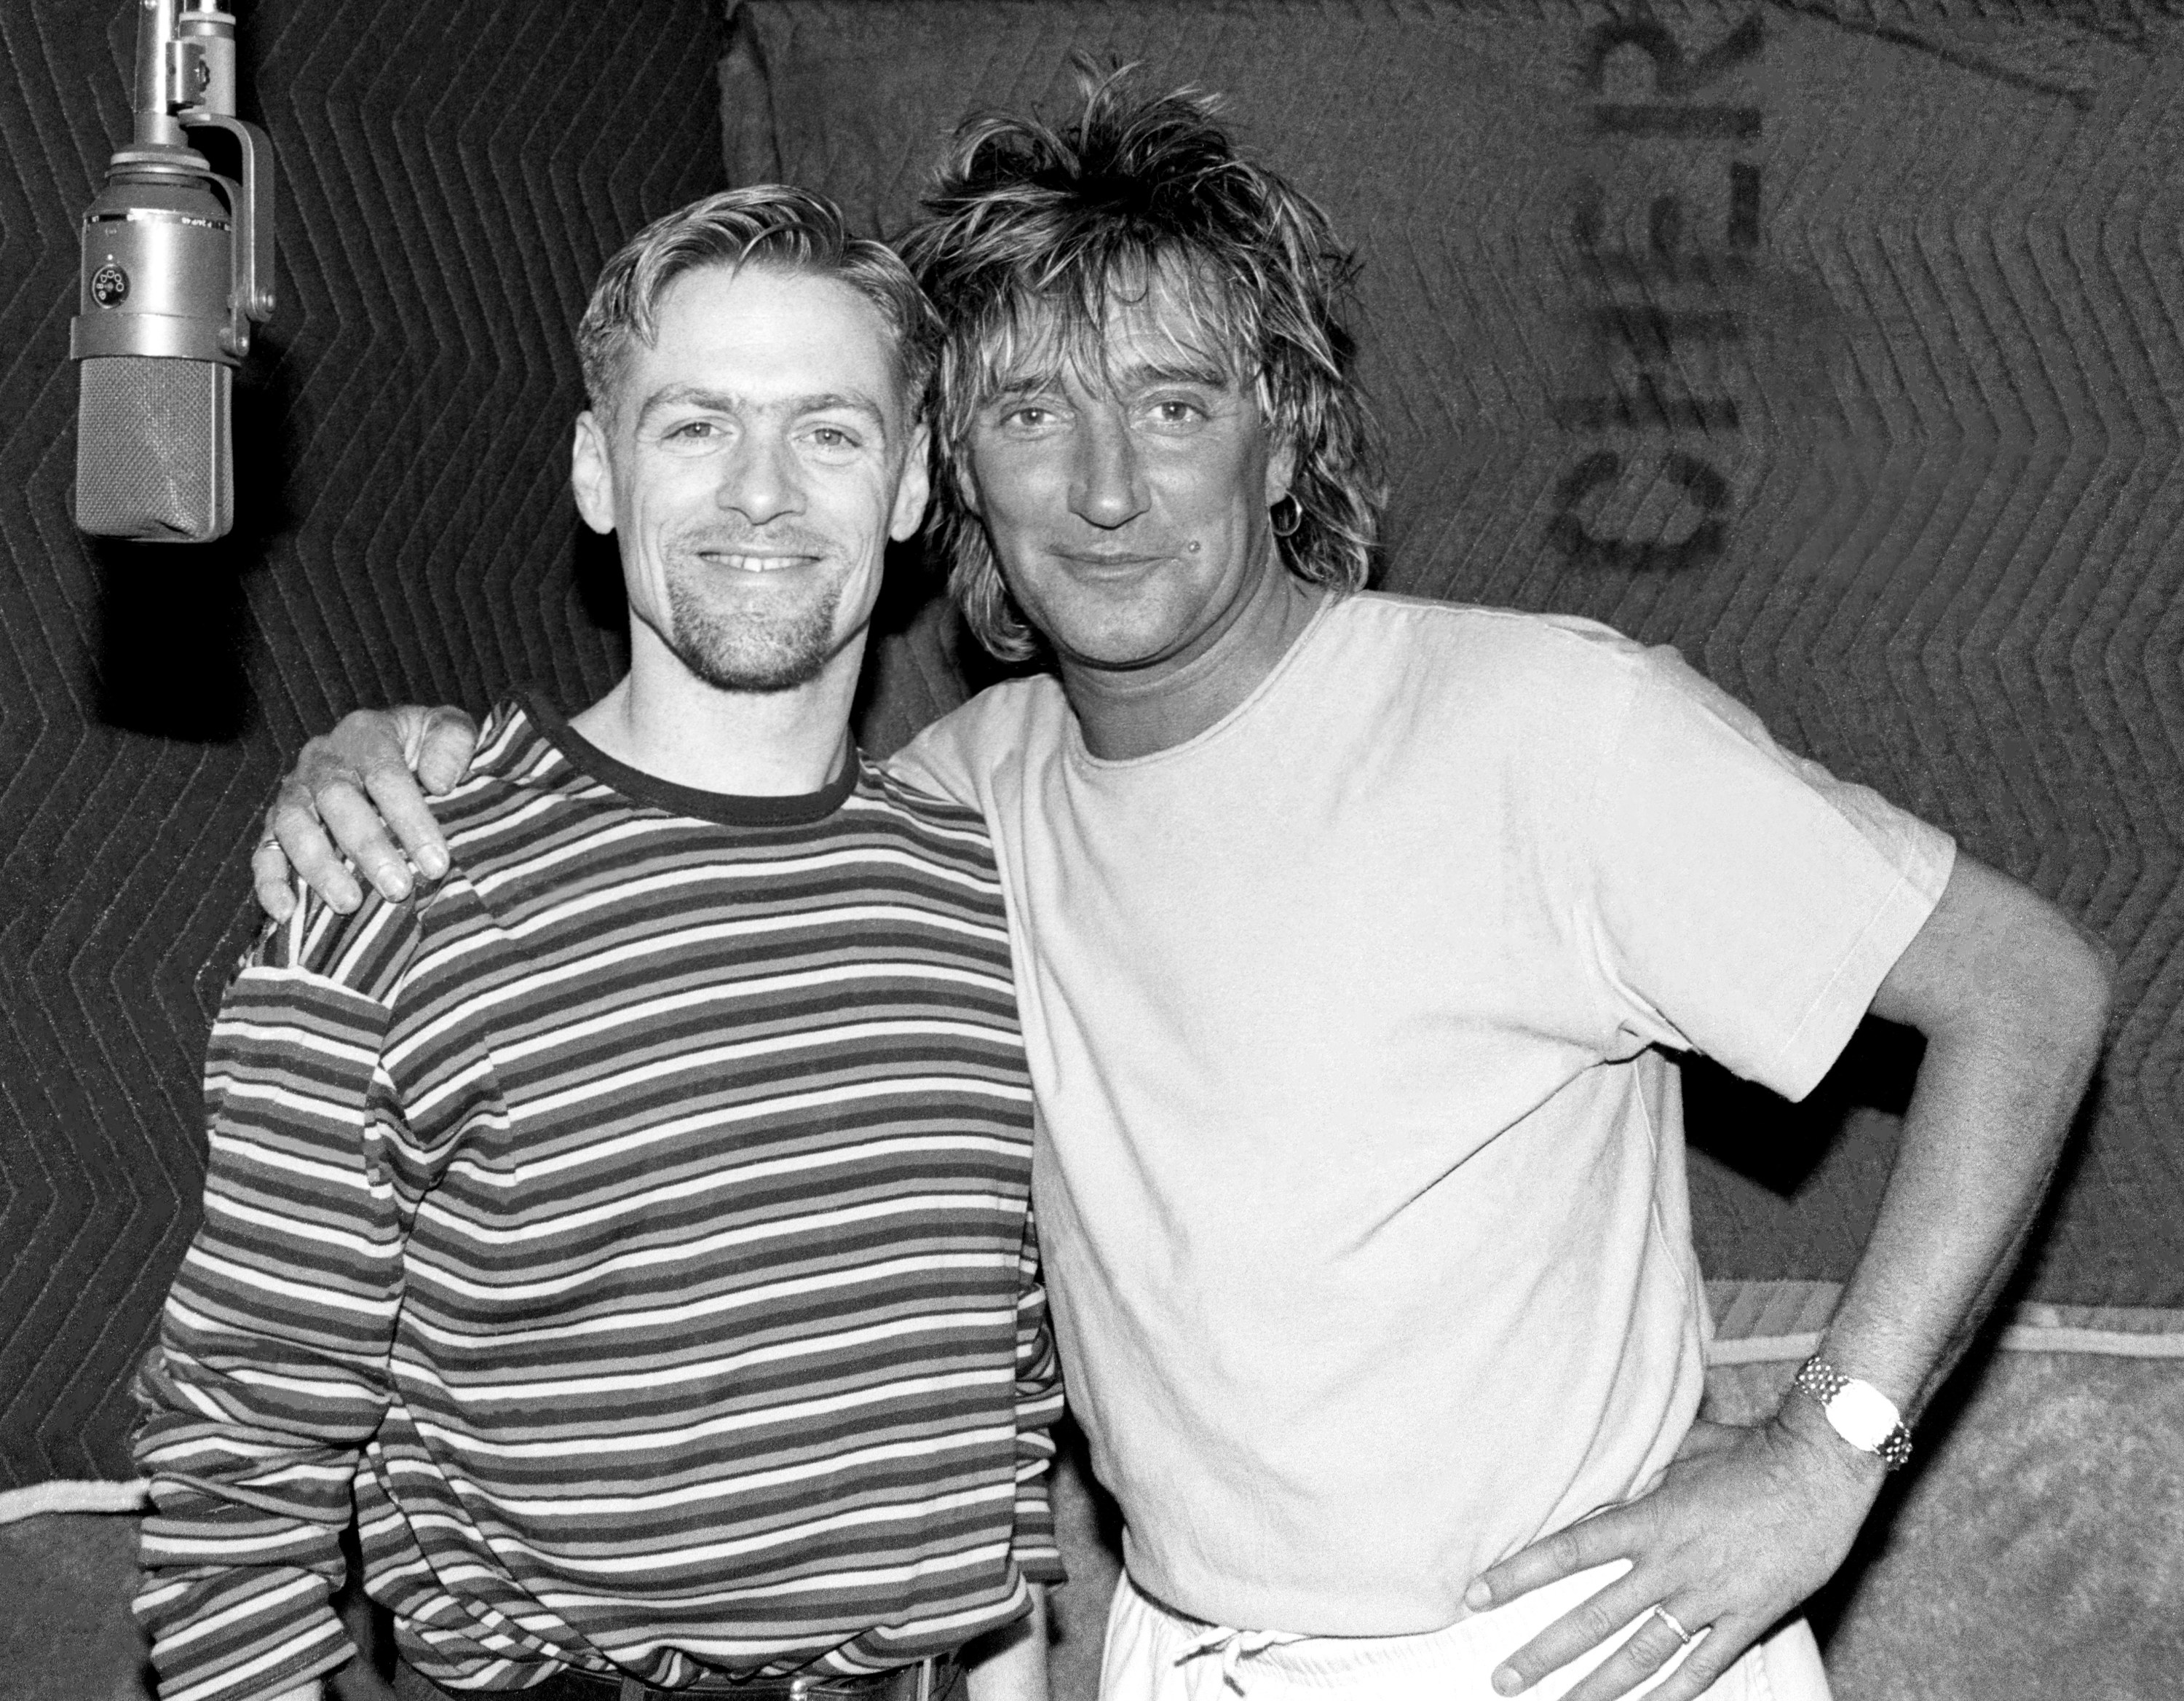 Canadian guitarist, singer, composer, record producer, photographer, and philanthropist Bryan Adams and British rock and pop singer, songwriter, and record producer Rod Stewart pose for a portrait while in studio recording a song